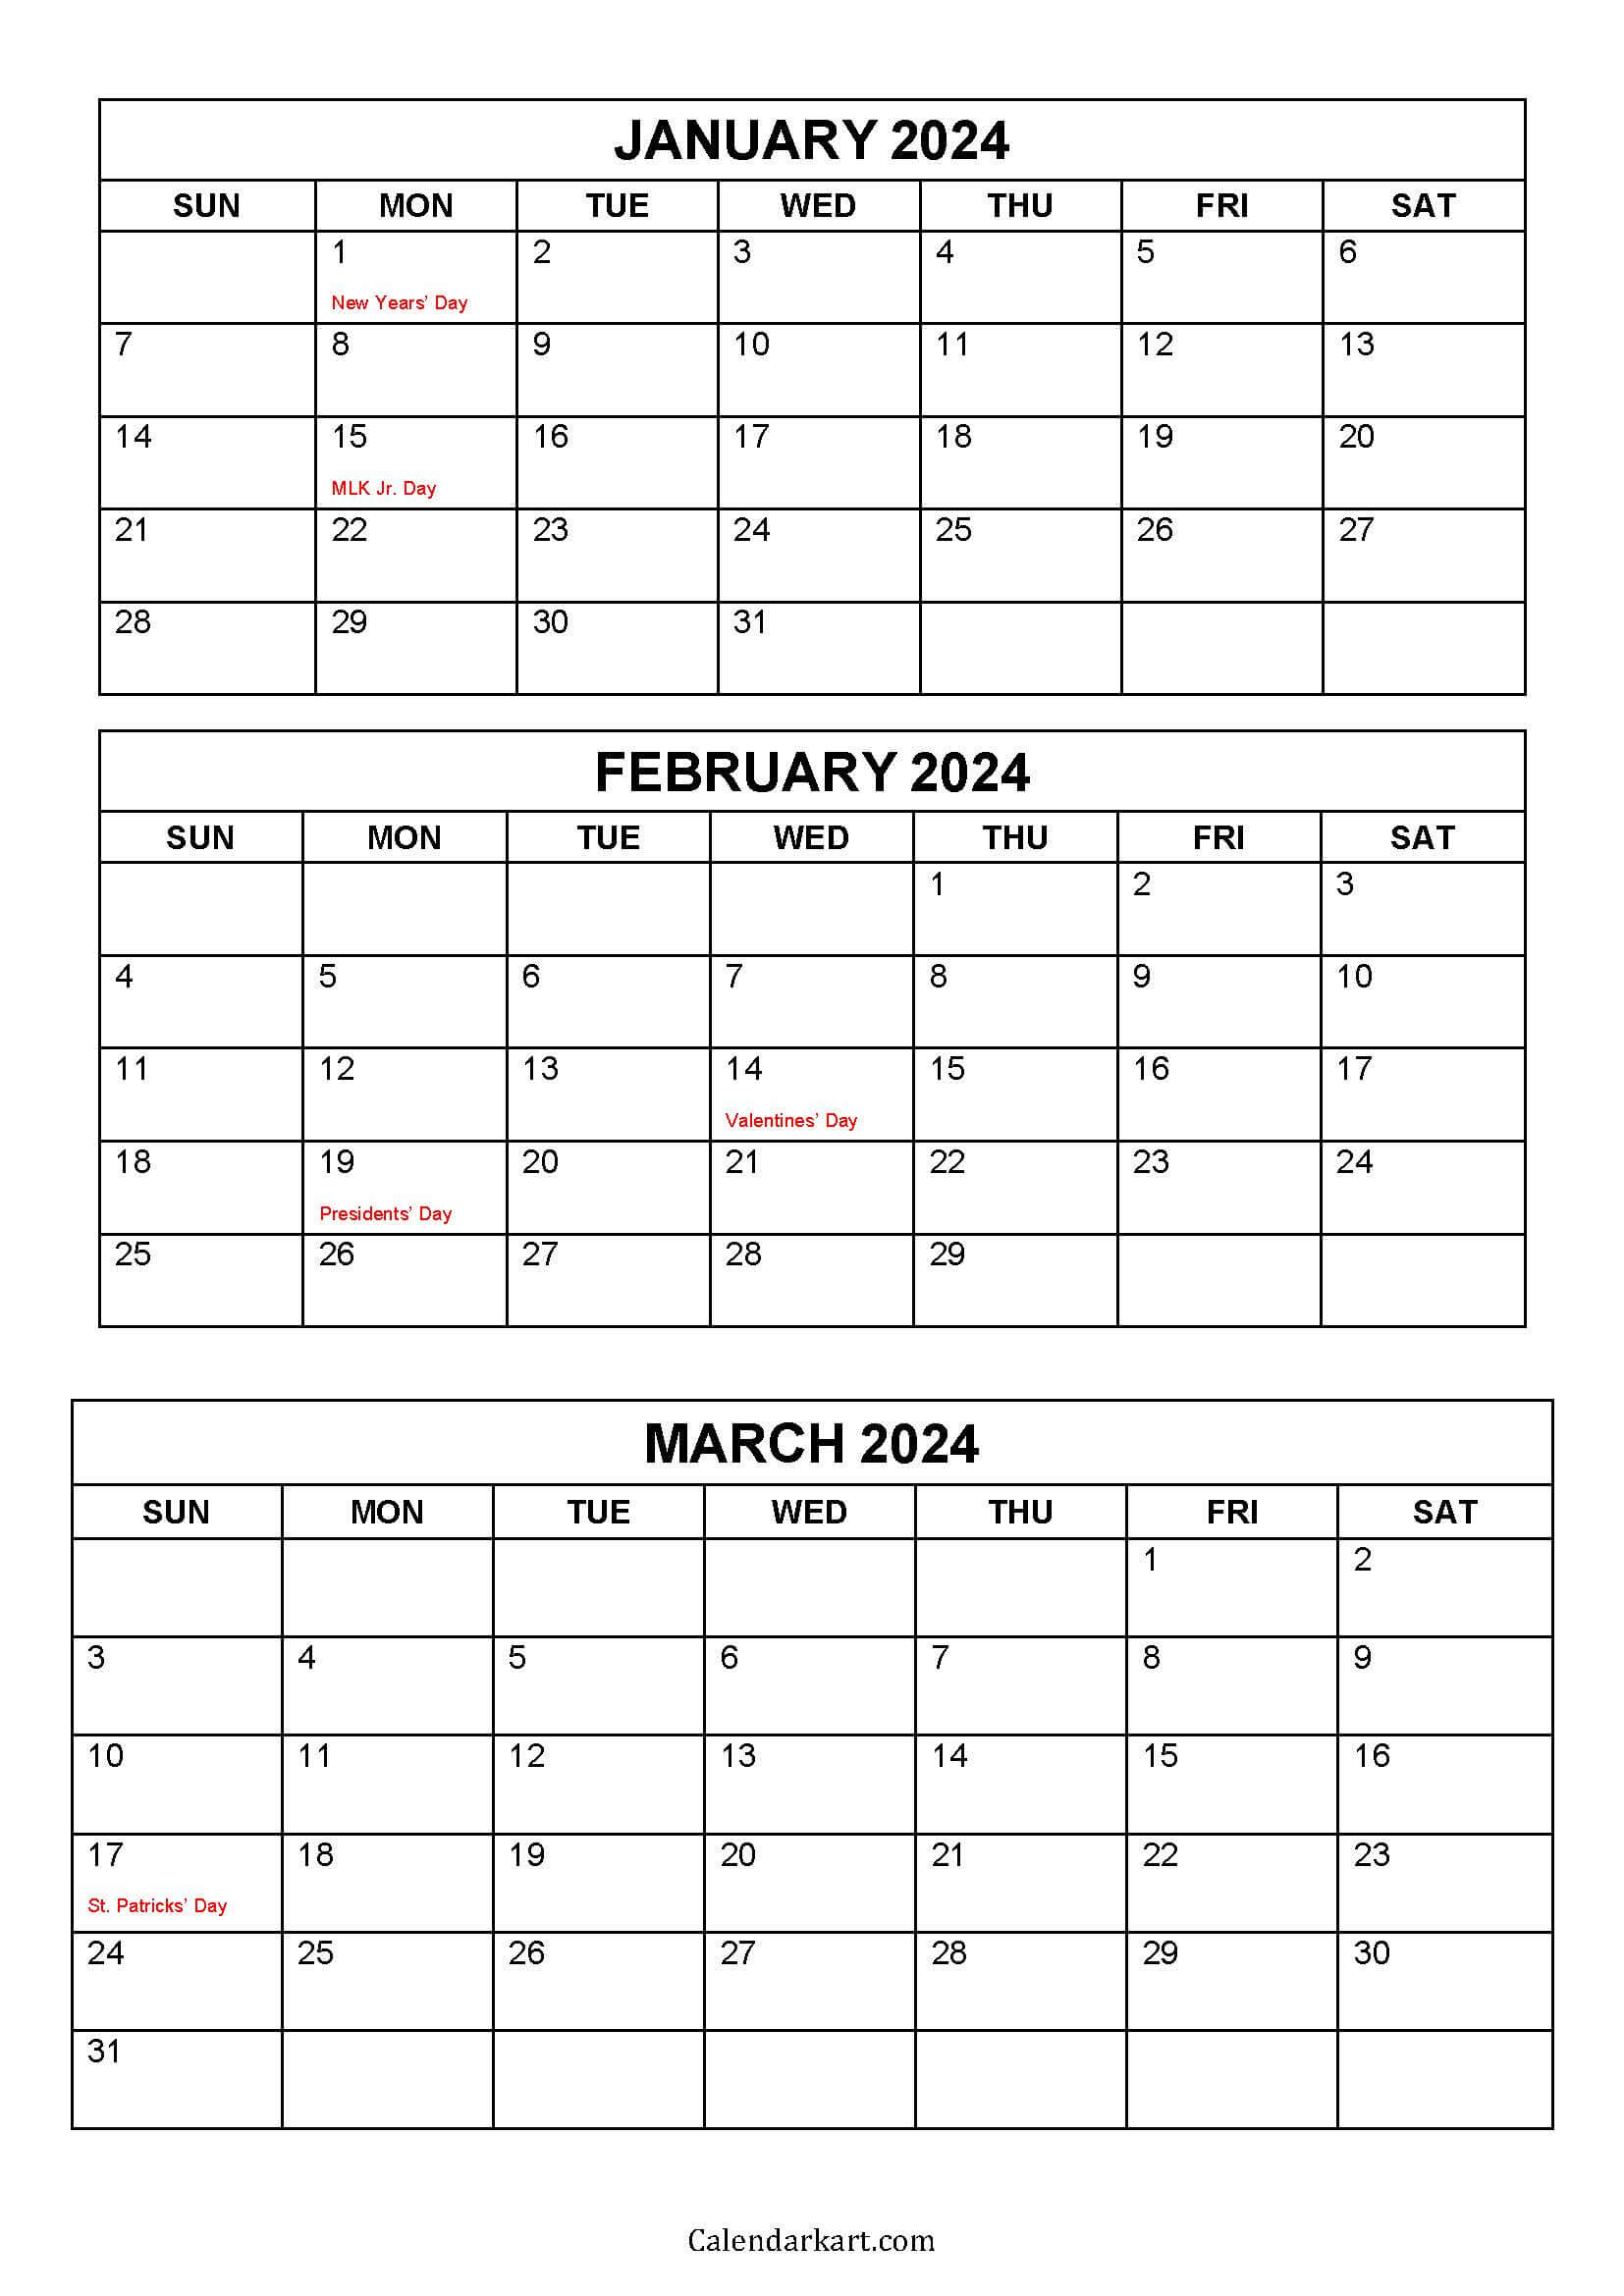 Free Printable January To March 2024 Calendar - Calendarkart | Free Printable Calendar 2024 Quarterly